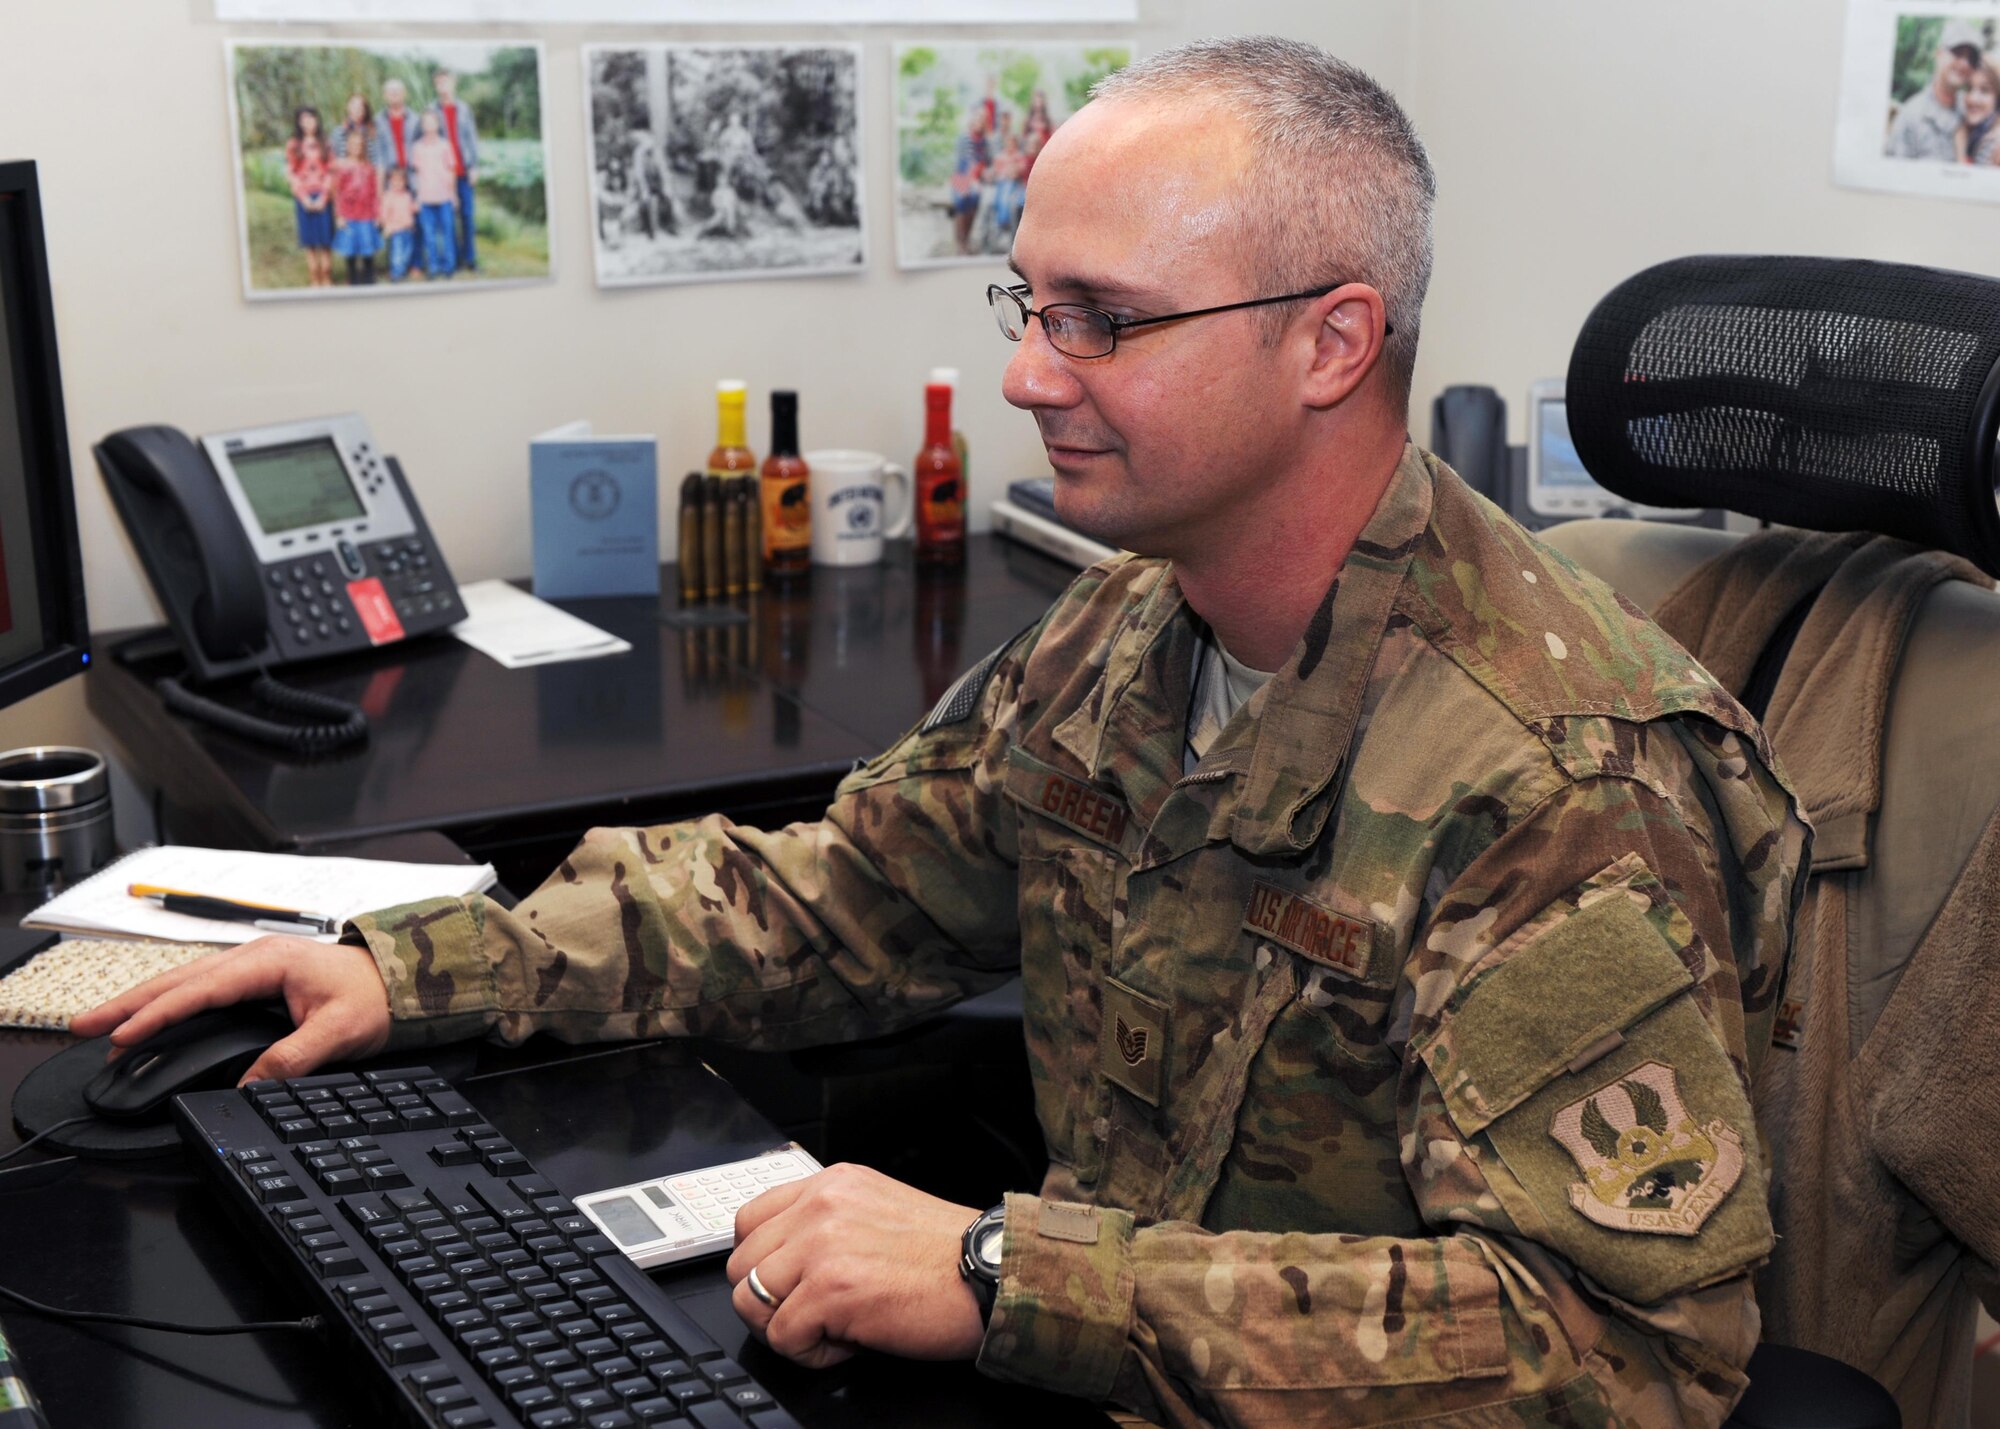 Tech. Sgt. Gregory Green analyzes spreadsheets Feb. 12, 2015, at Bagram Air Field, Afghanistan. Green is a 455th Expeditionary Force Support Squadron manpower analyst. As a one-deep analyst in the only Air Force manpower office in Afghanistan, Green provides personnel retention and reduction recommendations to commanders across the wing. (U.S. Air Force photo/Staff Sgt. Whitney Amstutz)